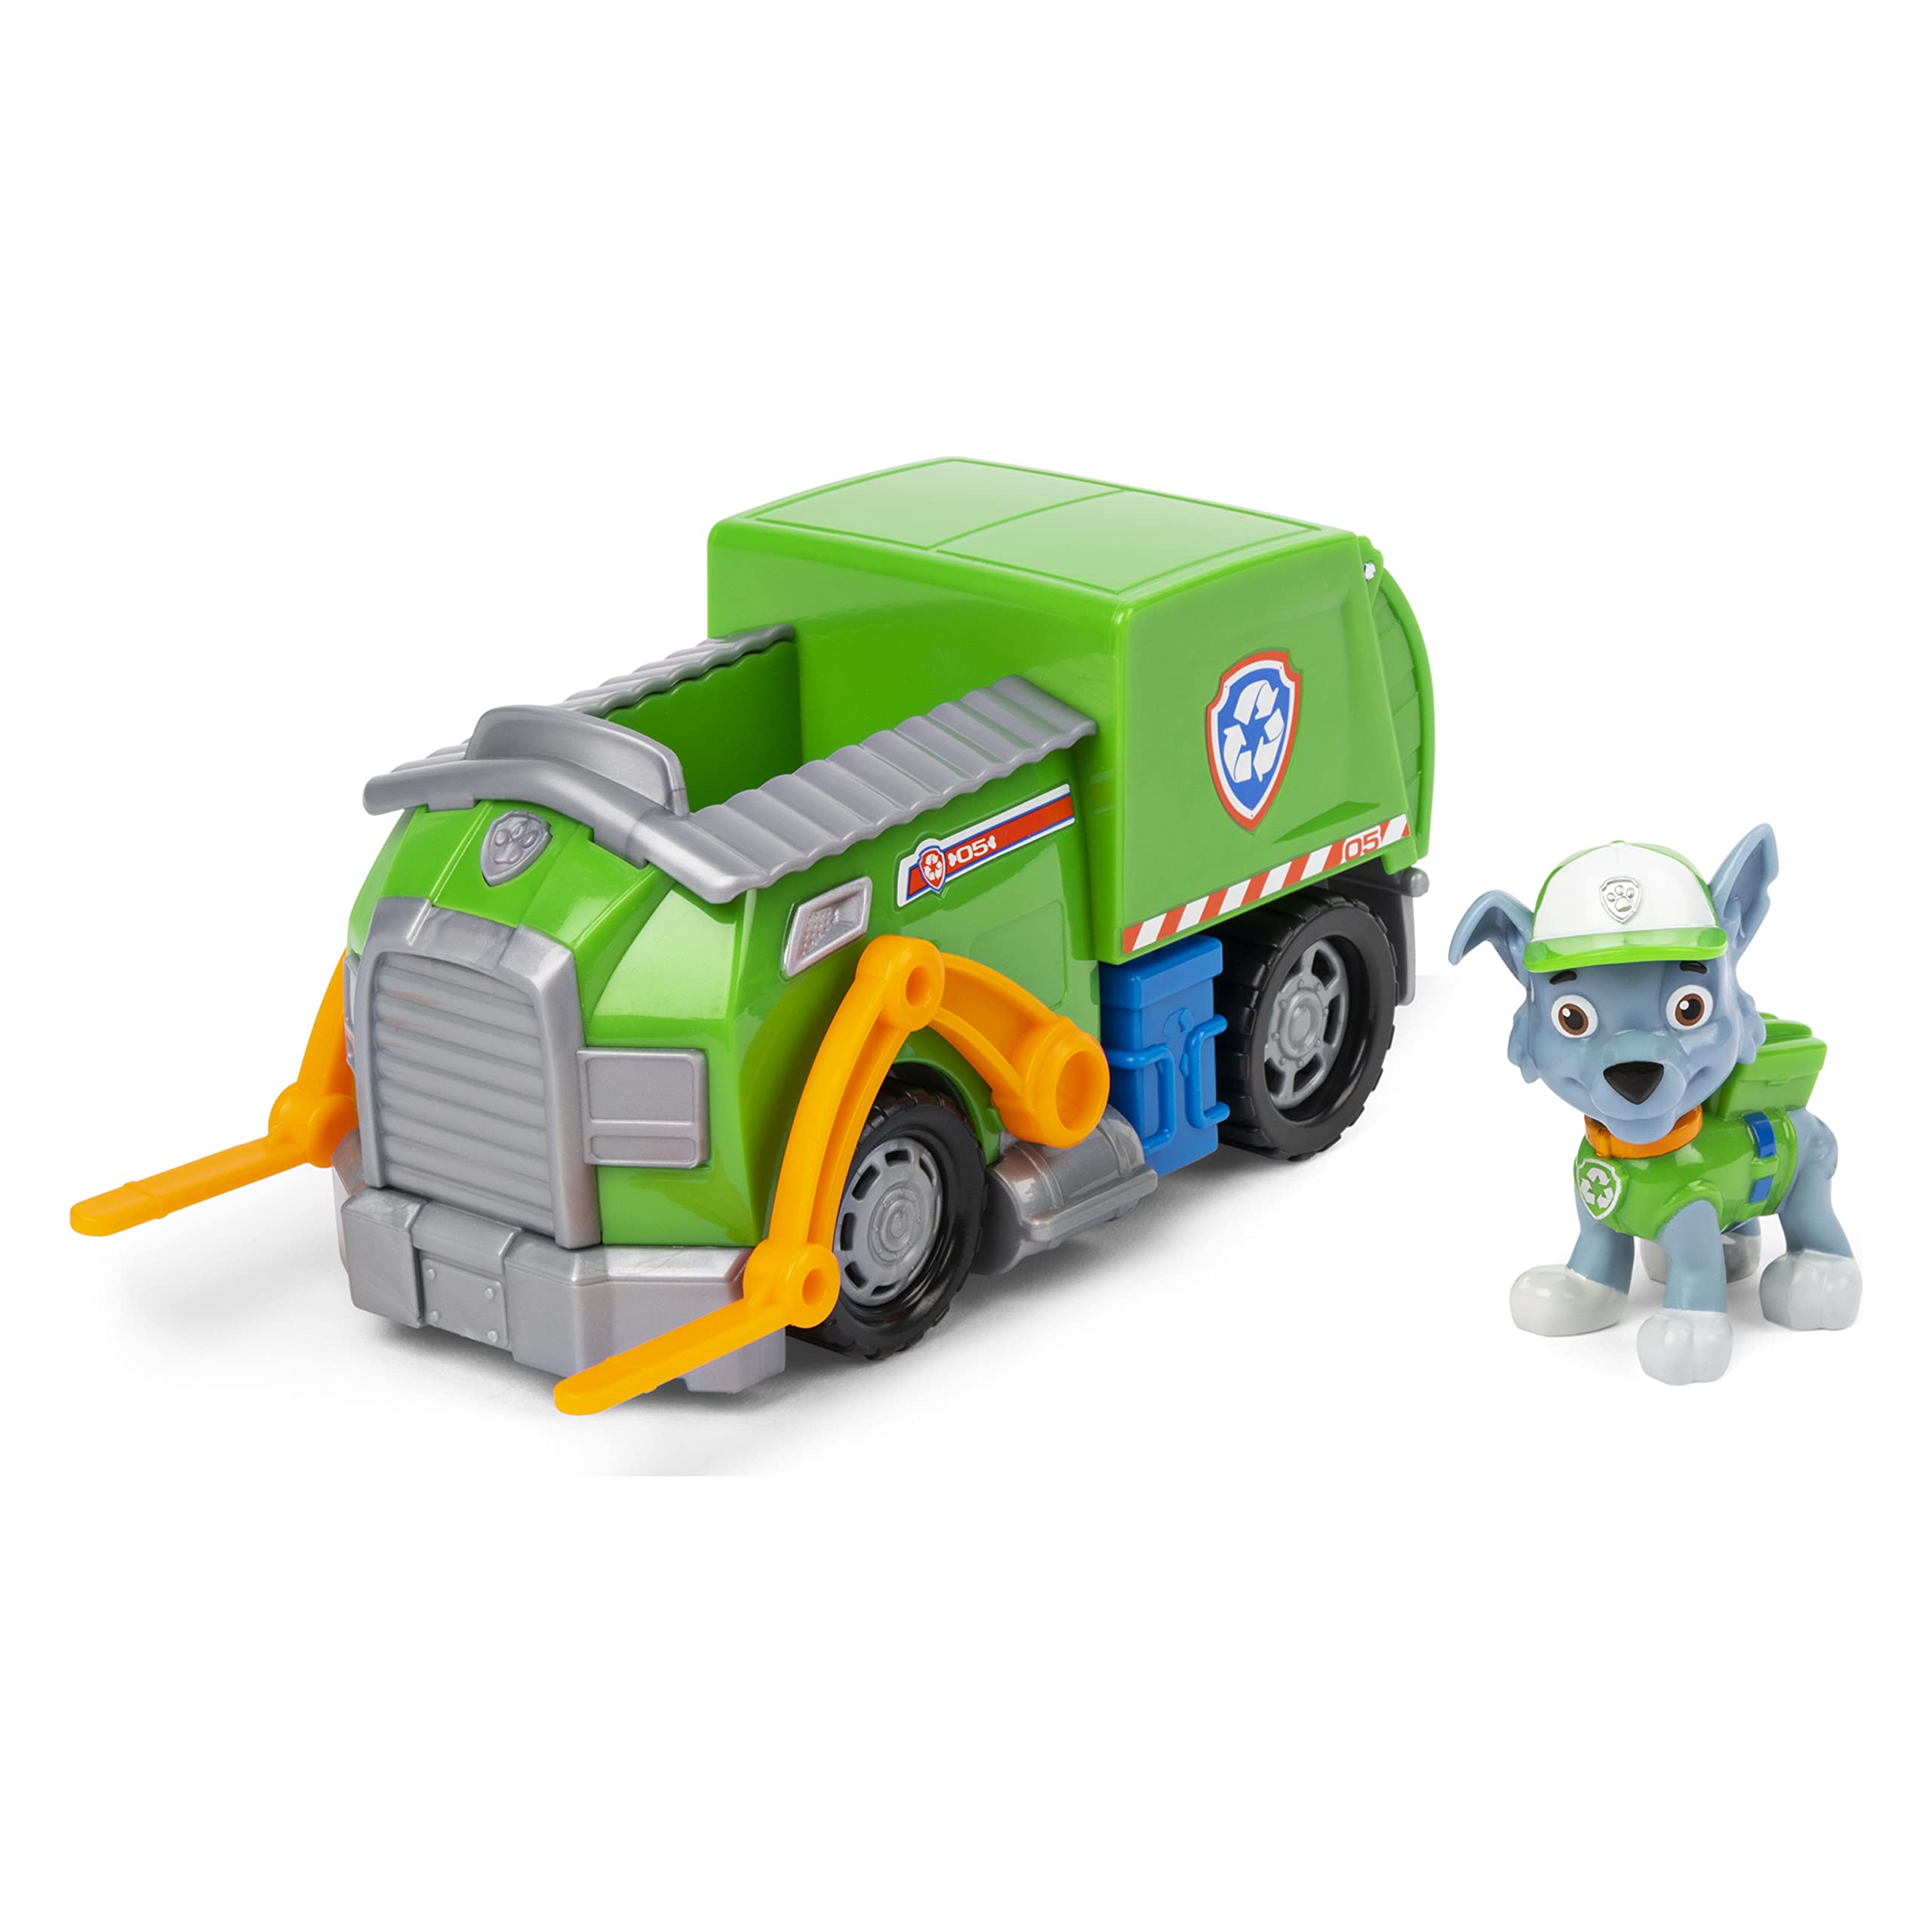 Paw Patrol, Rocky’s Recycle Truck Vehicle with Collectible Figure, for Kids Aged 3 and Up